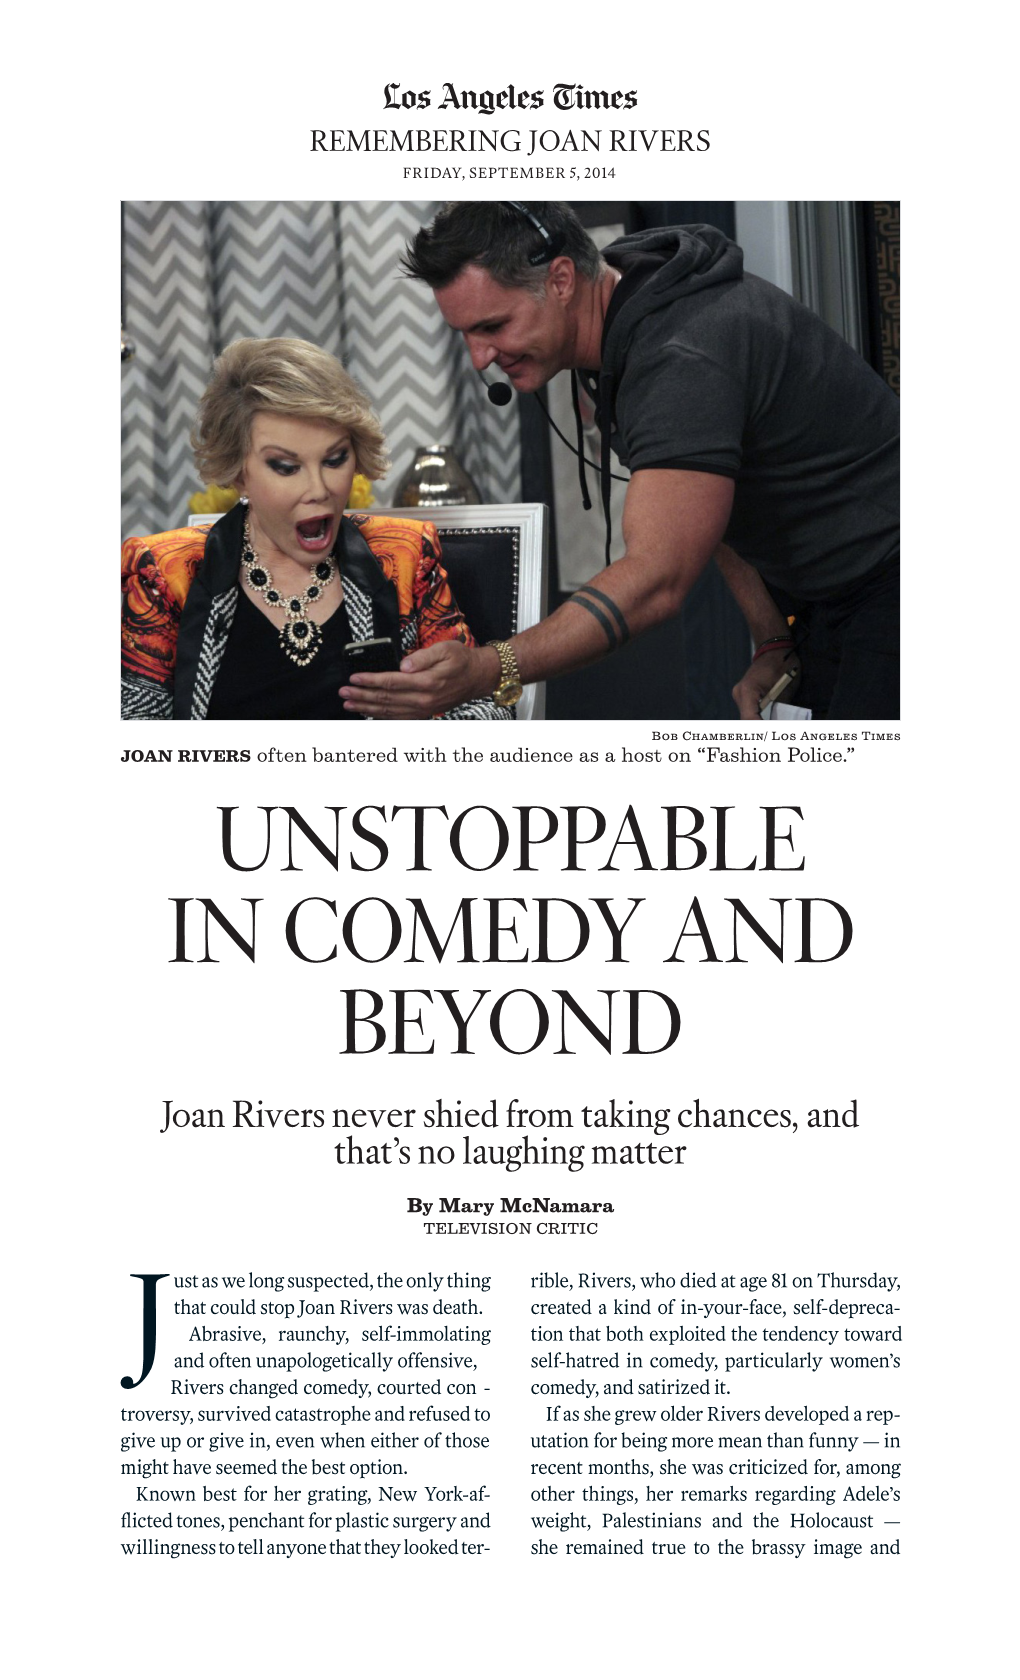 UNSTOPPABLE in COMEDY and BEYOND Joan Rivers Never Shied from Taking Chances, and That’S No Laughing Matter